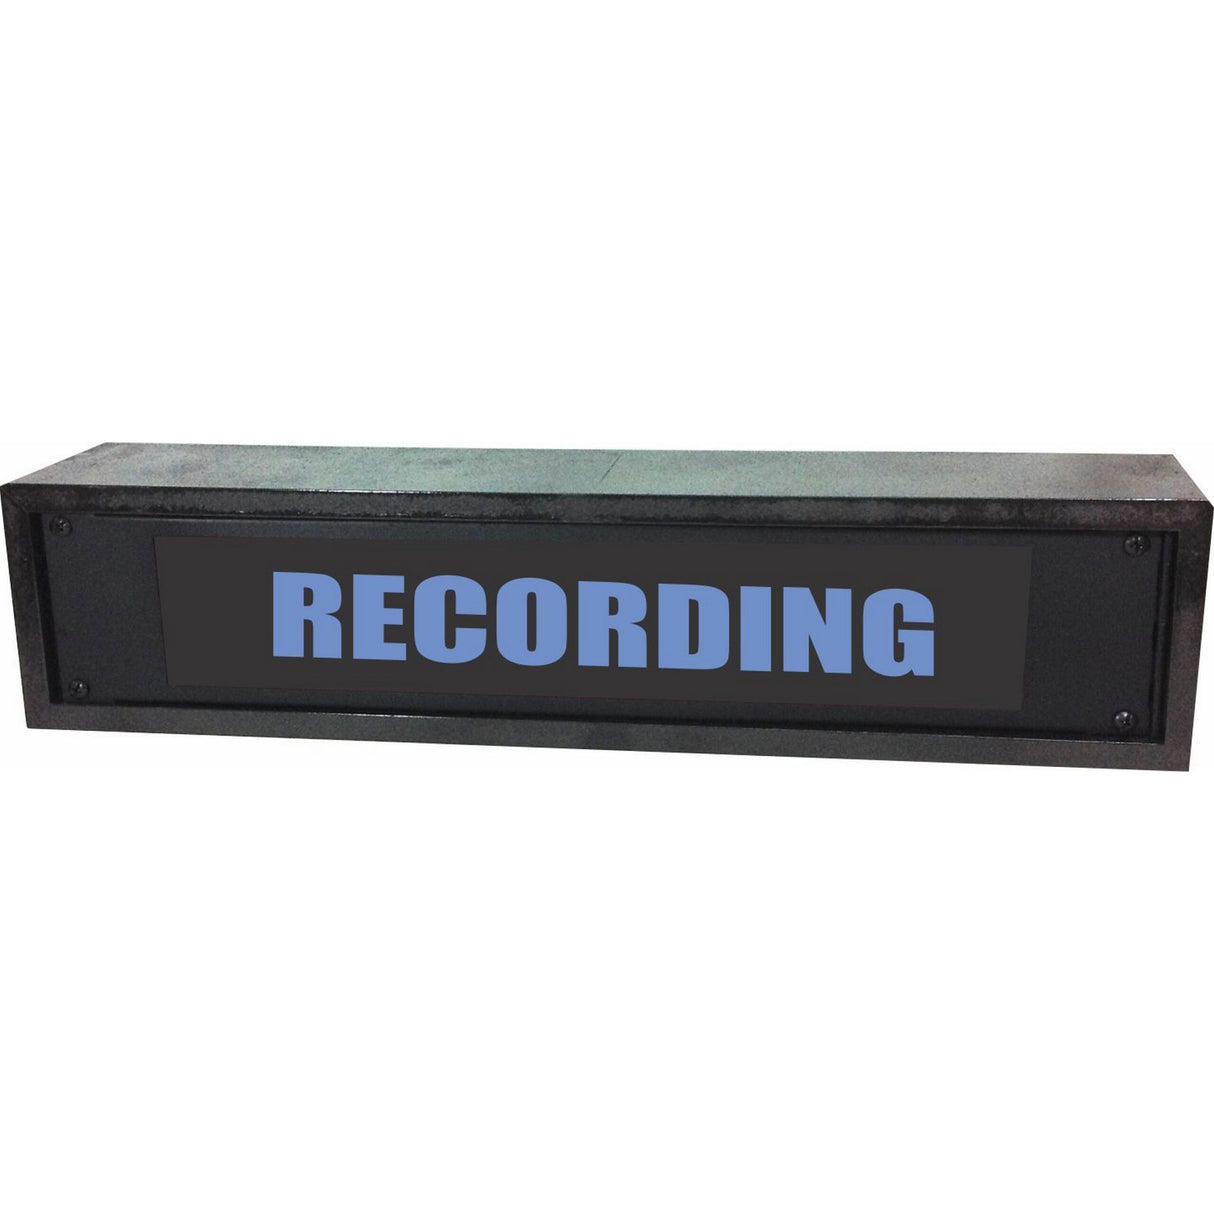 American Recorder OAS-4052BL "RECORDING" 2U Rackmount LED Lighted Sign with Enclosure, Blue